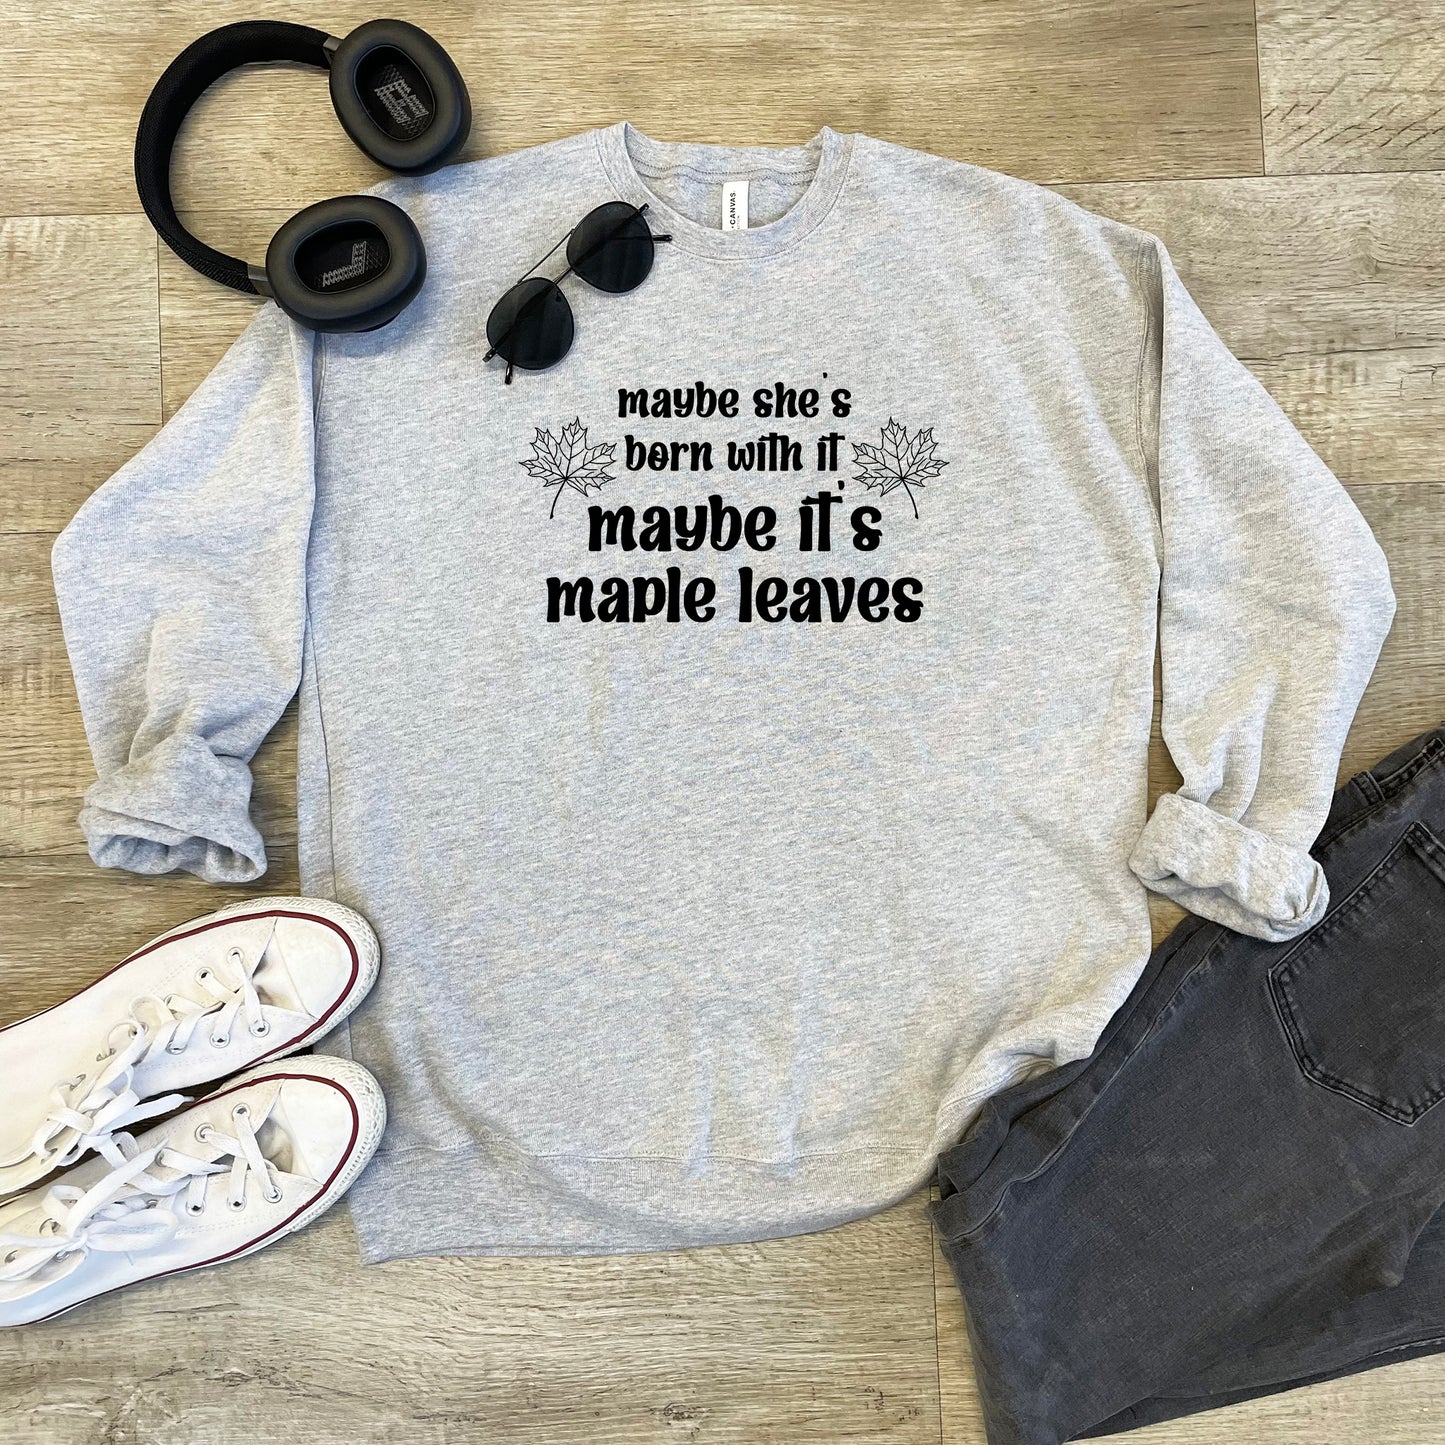 Maybe She's Born With It, Maybe It's Maple Leaves - Unisex Sweatshirt - Heather Gray or Dusty Blue